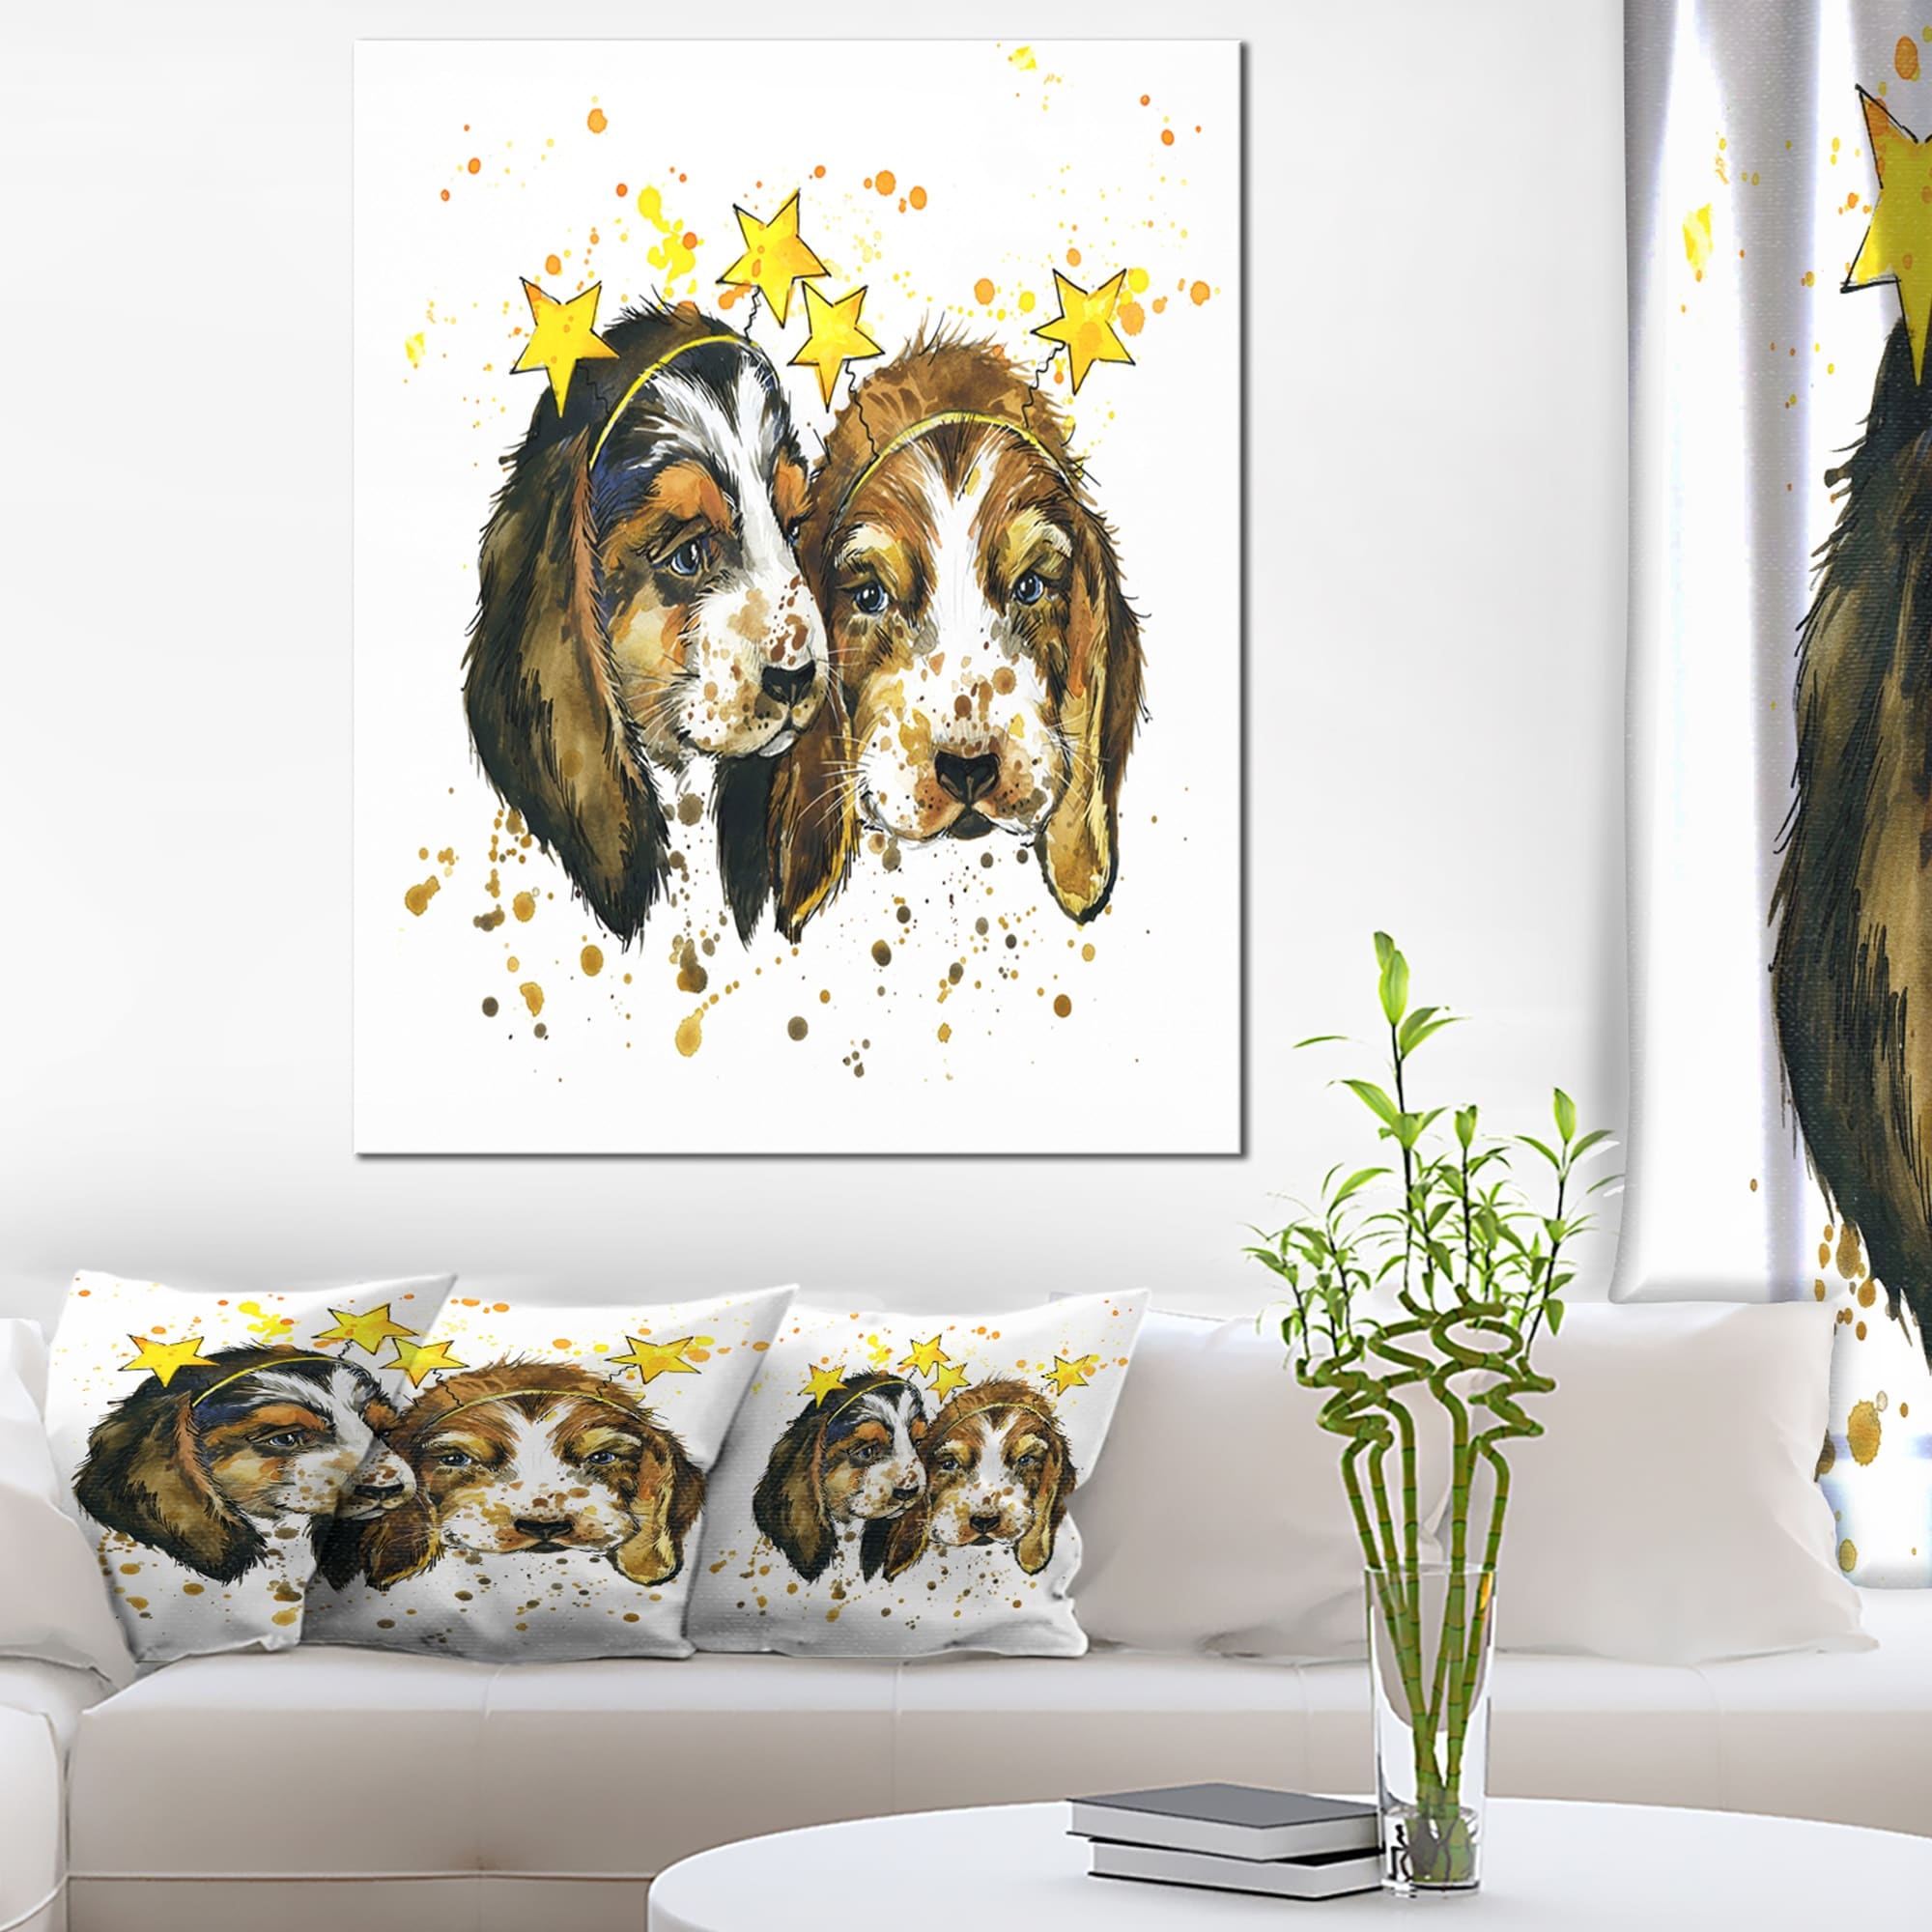 https://ak1.ostkcdn.com/images/products/is/images/direct/5a1709411c615237697978455693d650508ce104/Designart-%27Funny-Puppy-Dogs-Watercolor%27-Contemporary-Animal-Art-Canvas.jpg